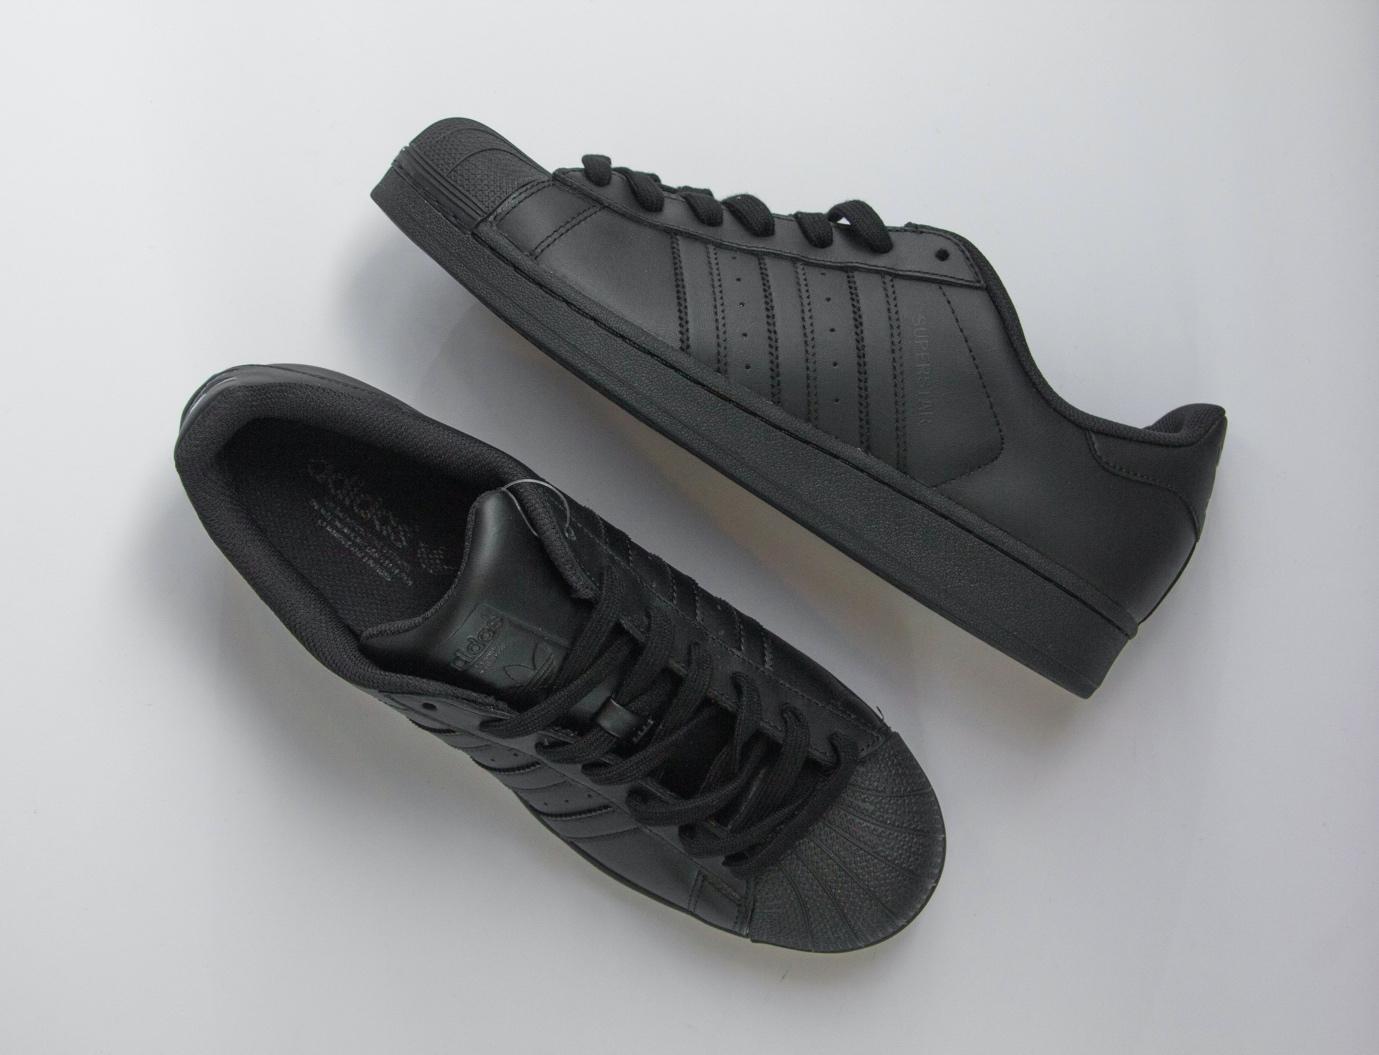 Ten fresh black sneakers you can always depend on